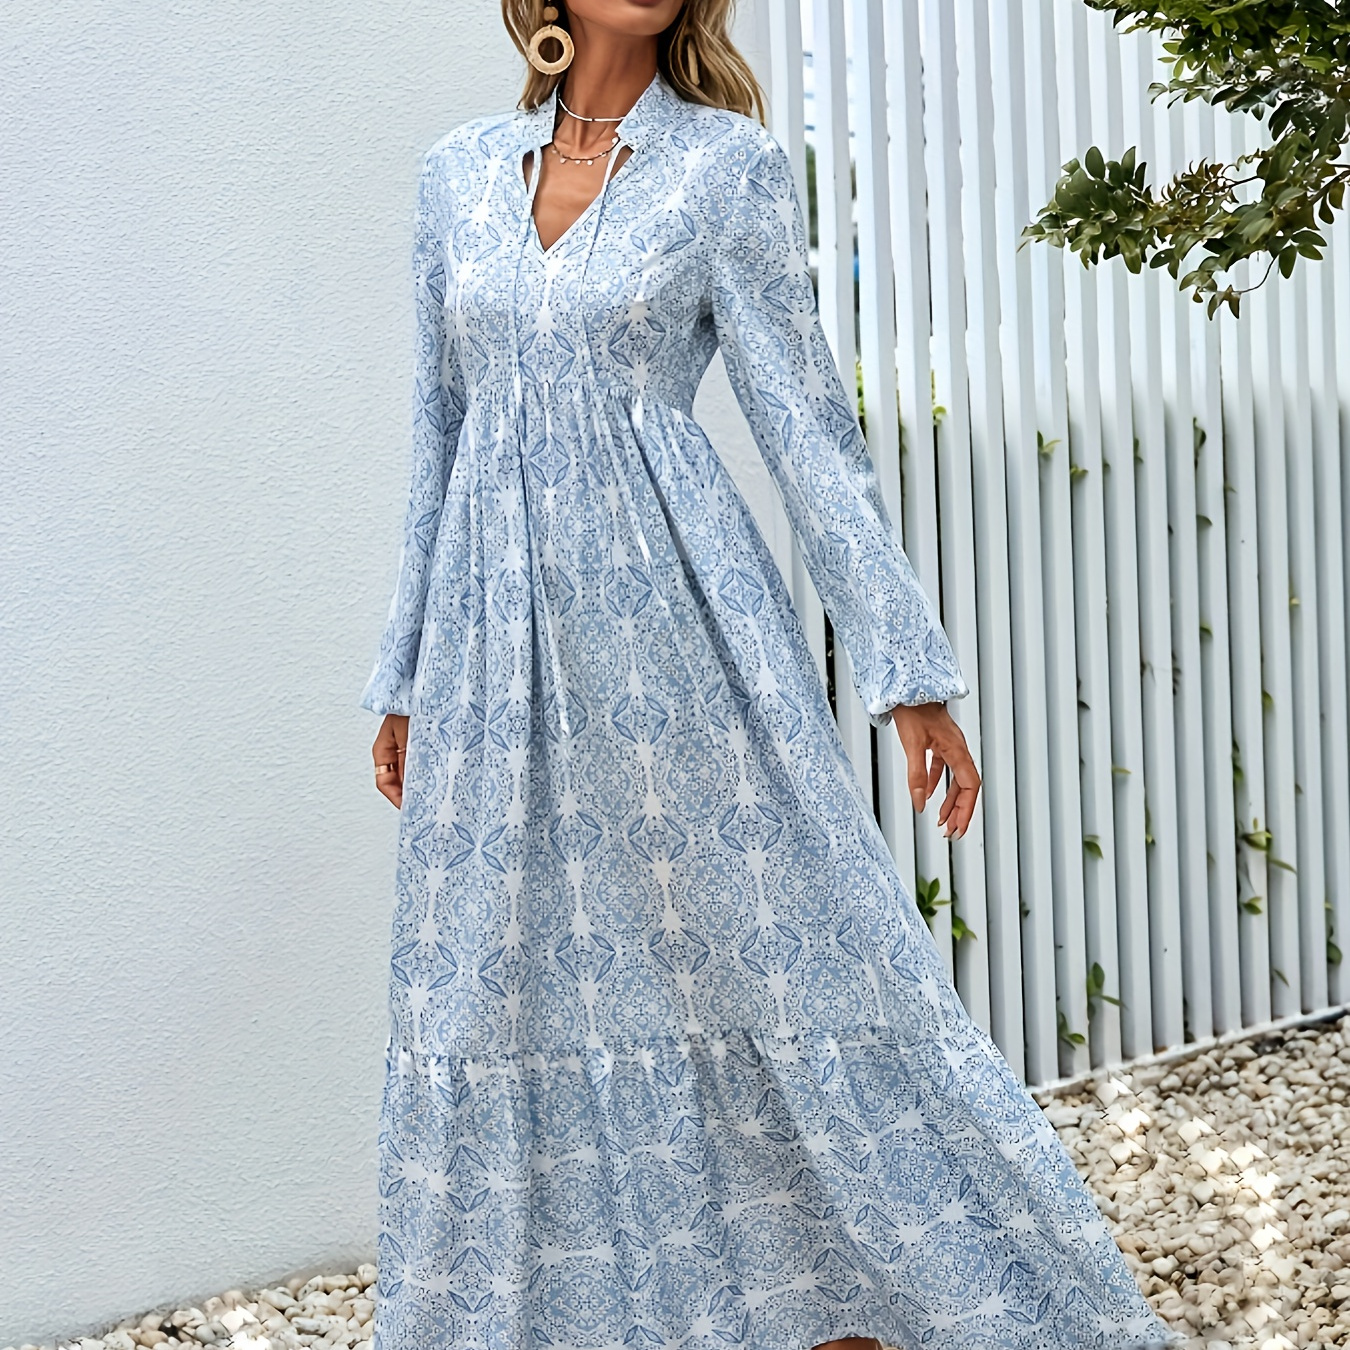 

Mandala Print V-neck Dress, Vacation Style Long Sleeve Cinched Waist A-line Maxi Dress For Spring & Fall, Women's Clothing